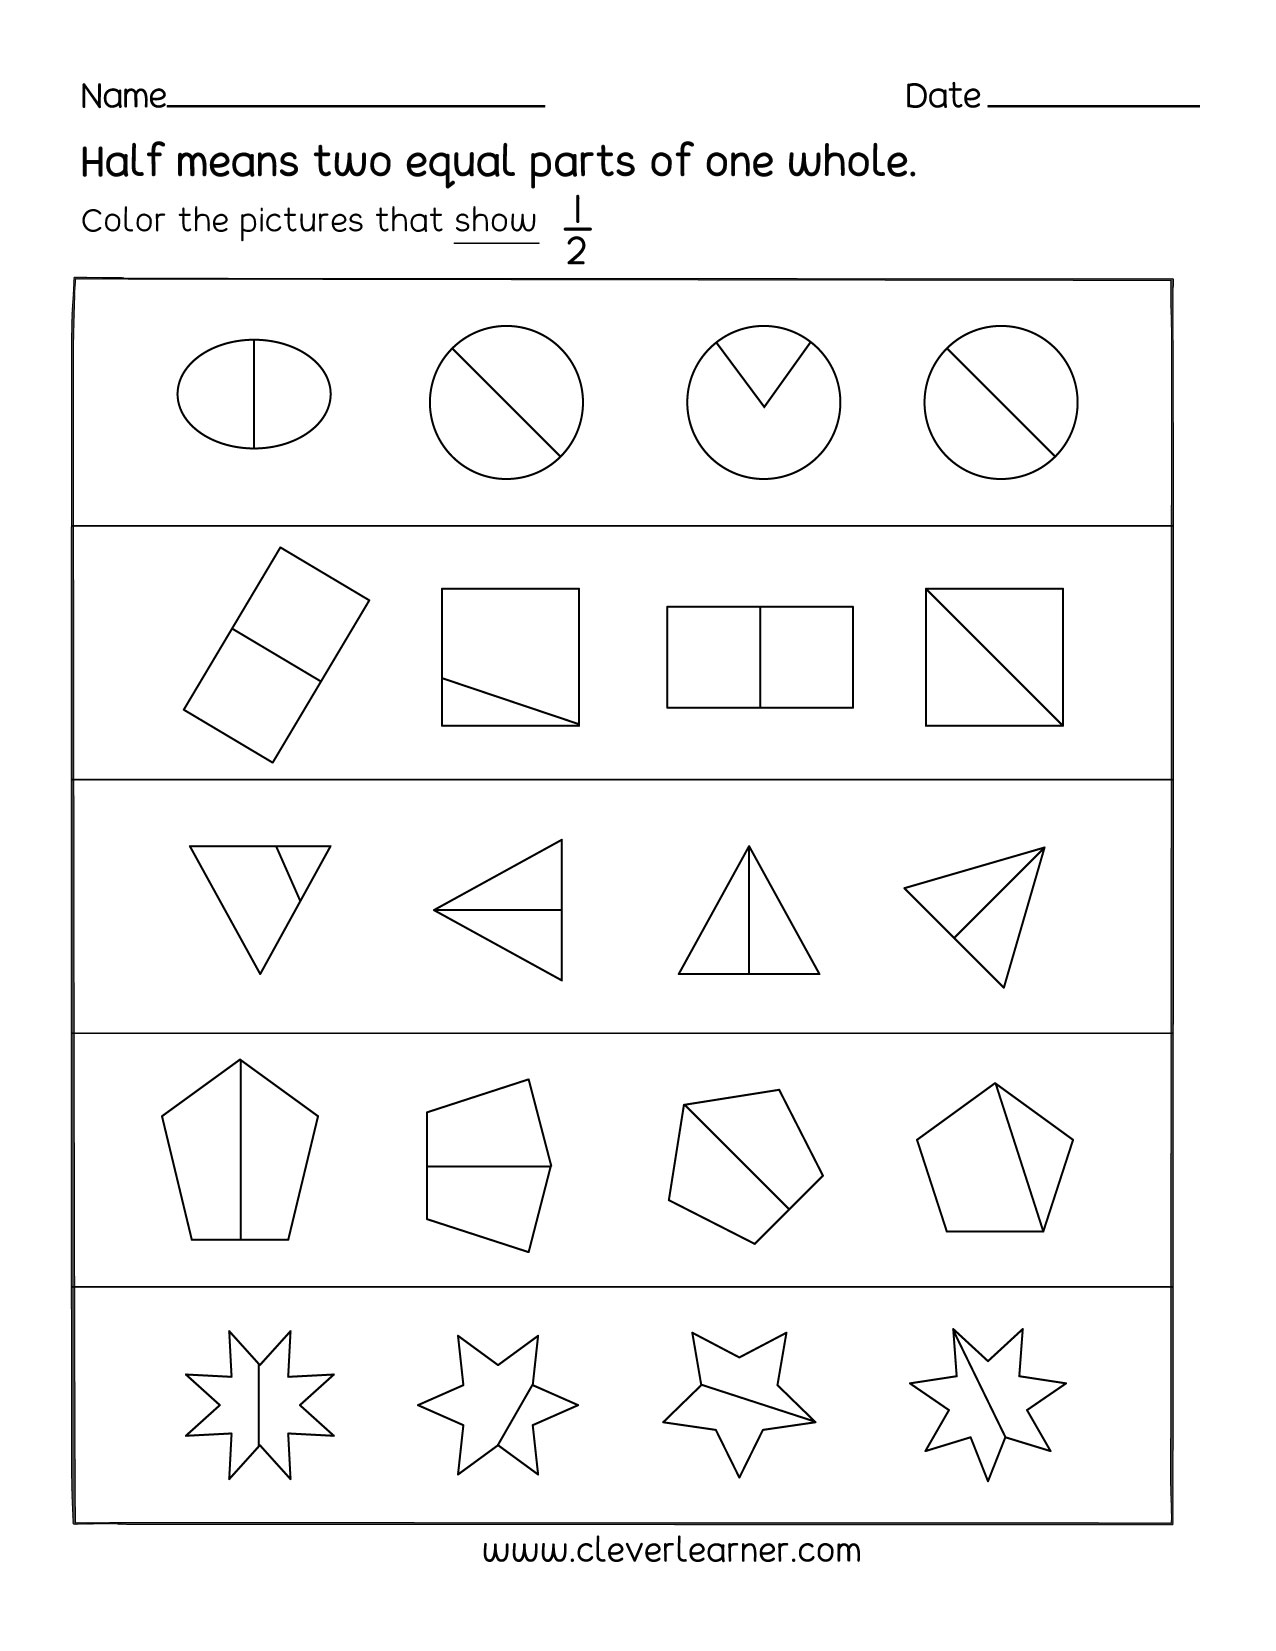 4th-grade-worksheets-with-math-exercises-learning-printable-fractions-worksheets-grade-4-4th